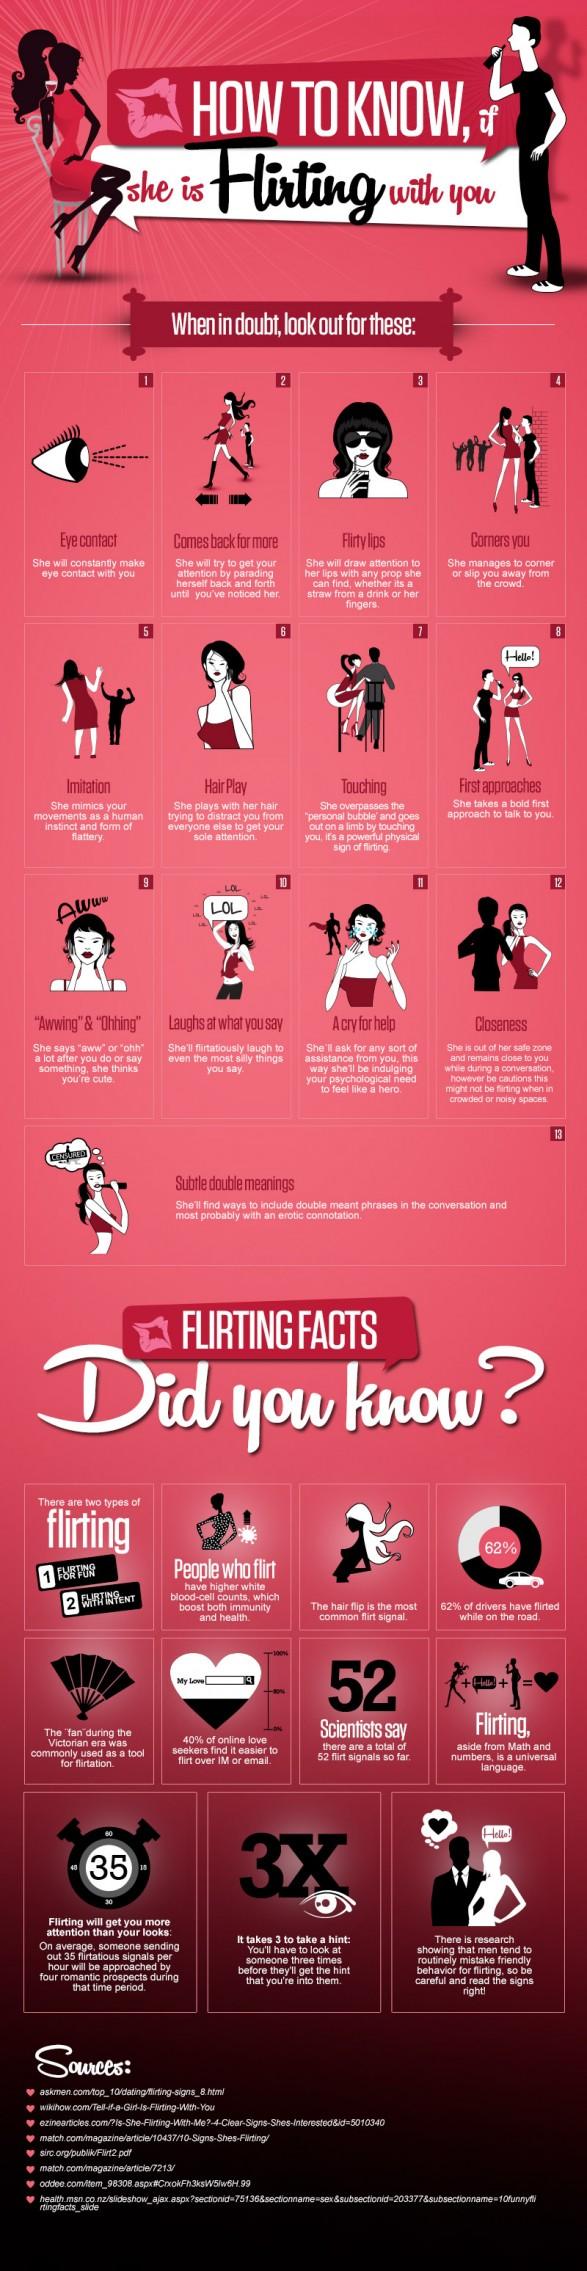 How to know if she is Flirting with you